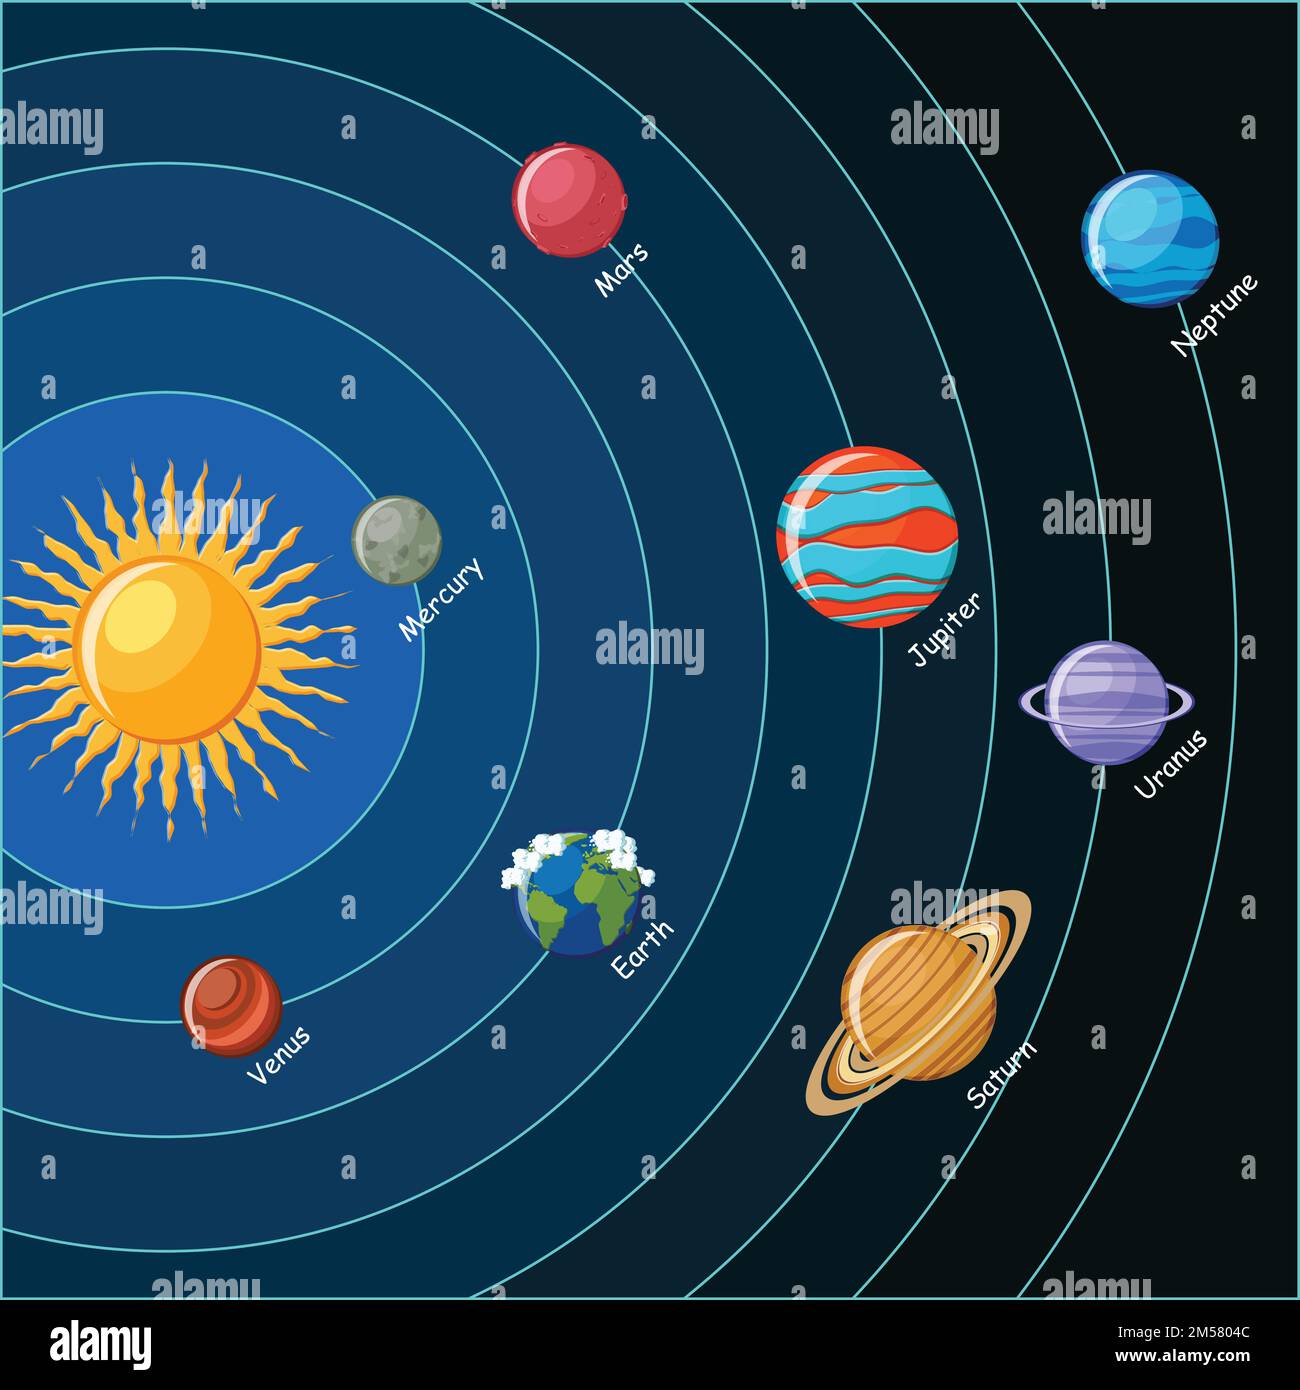 Solar system. Planets with orbits around  the sun. Educational astronomy for kids. Vector illustration in flat style on dark blue background. Stock Vector